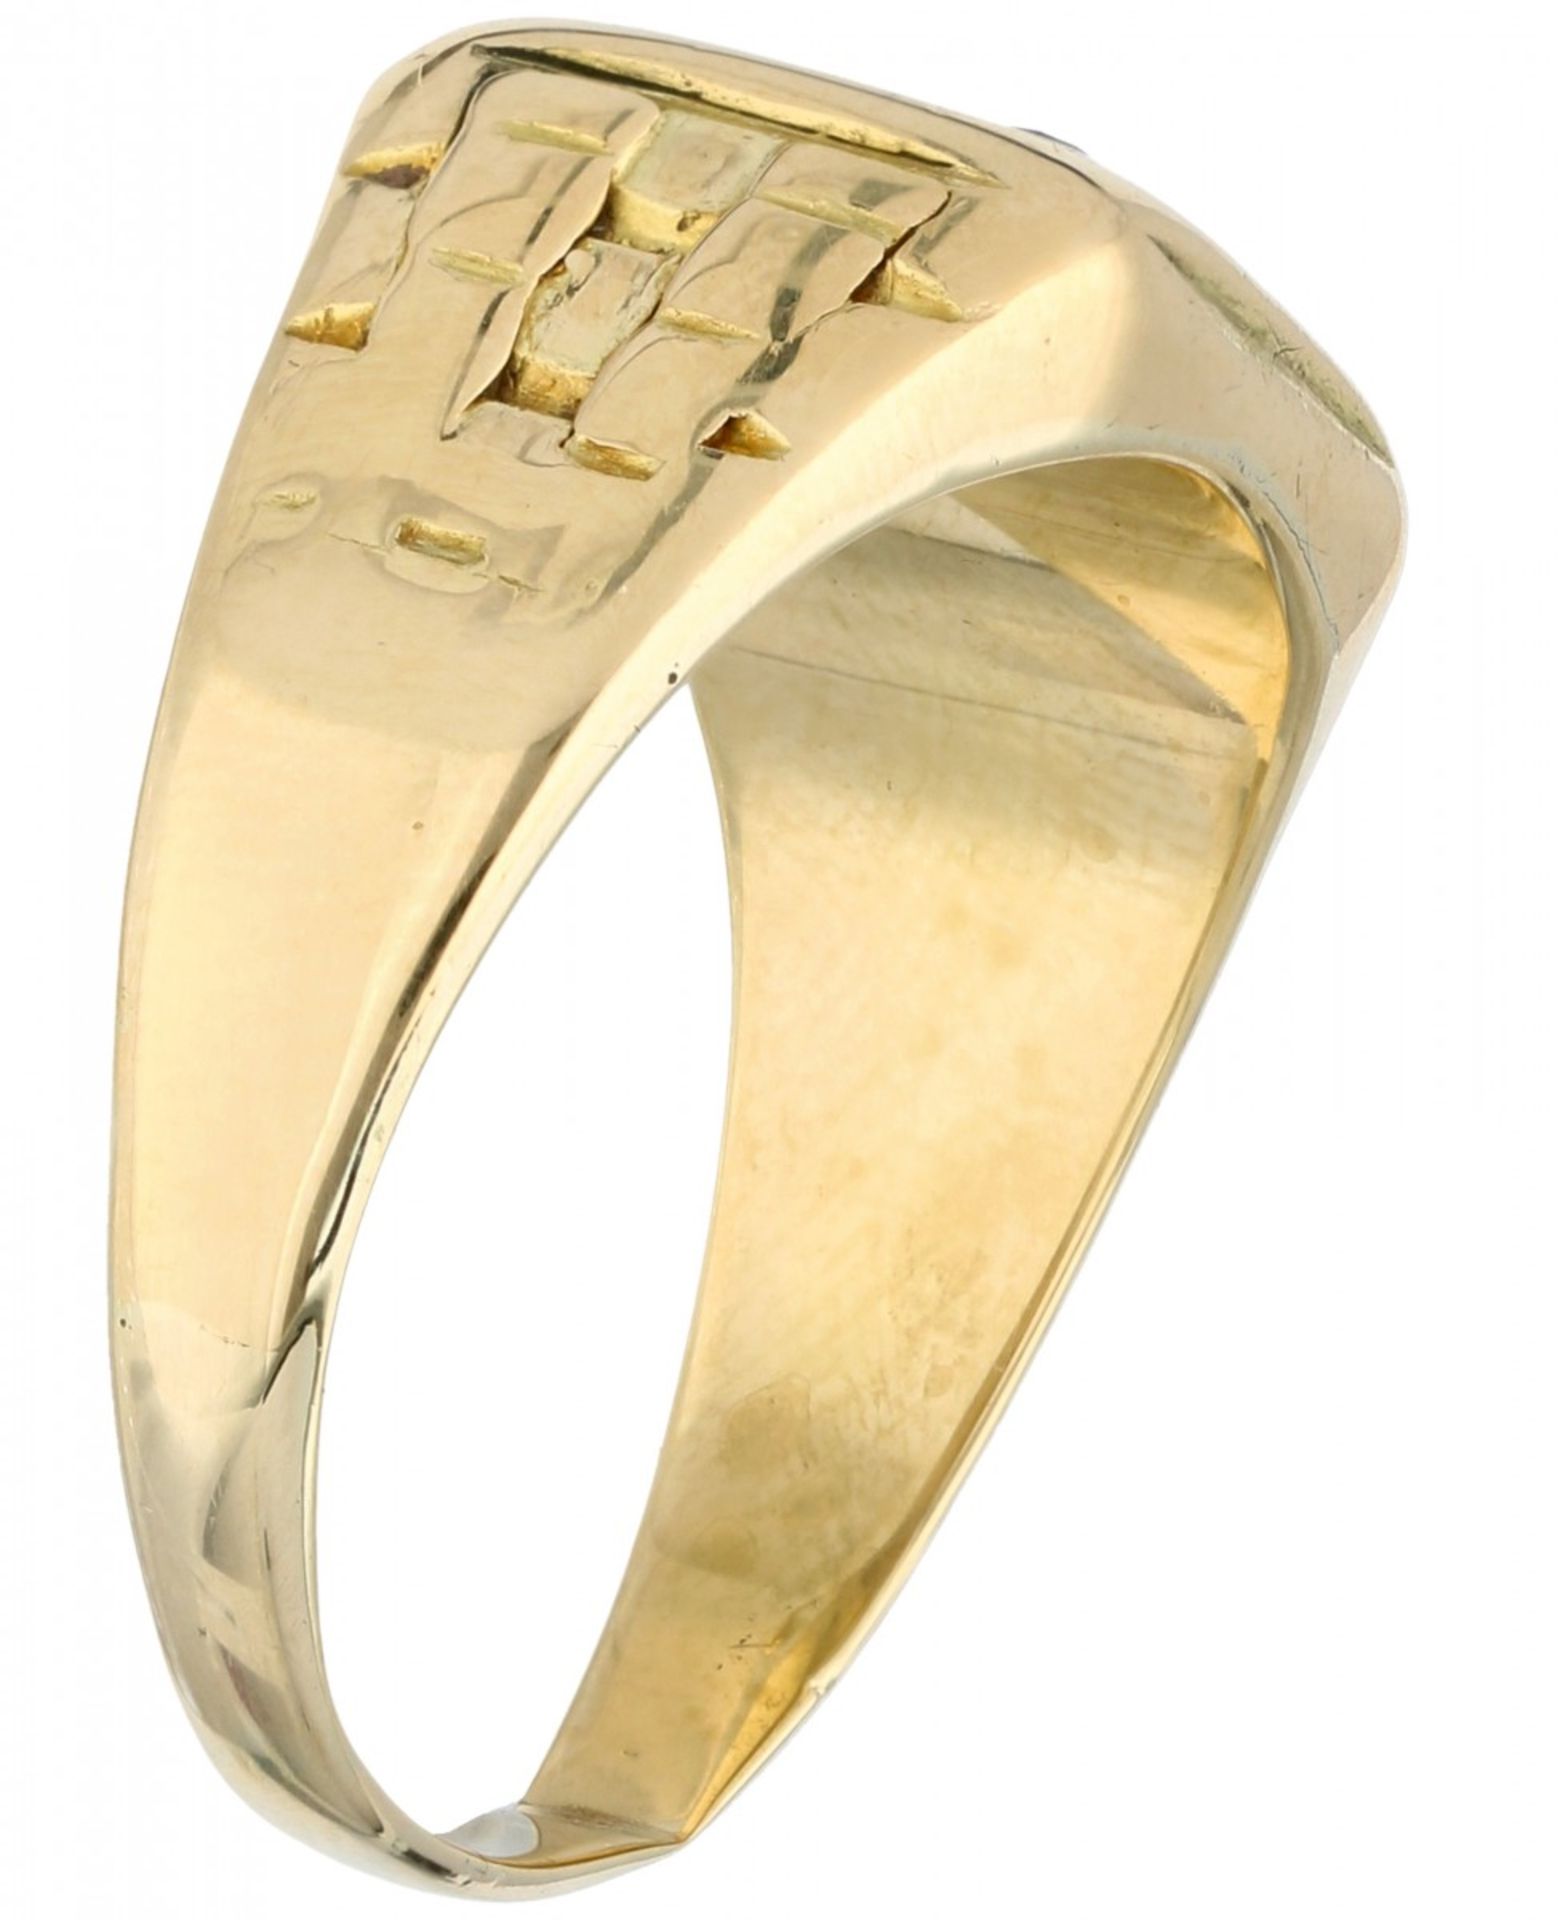 Yellow gold signet ring set with approx. 0.48 ct. diamond - 14 ct. - Image 2 of 2